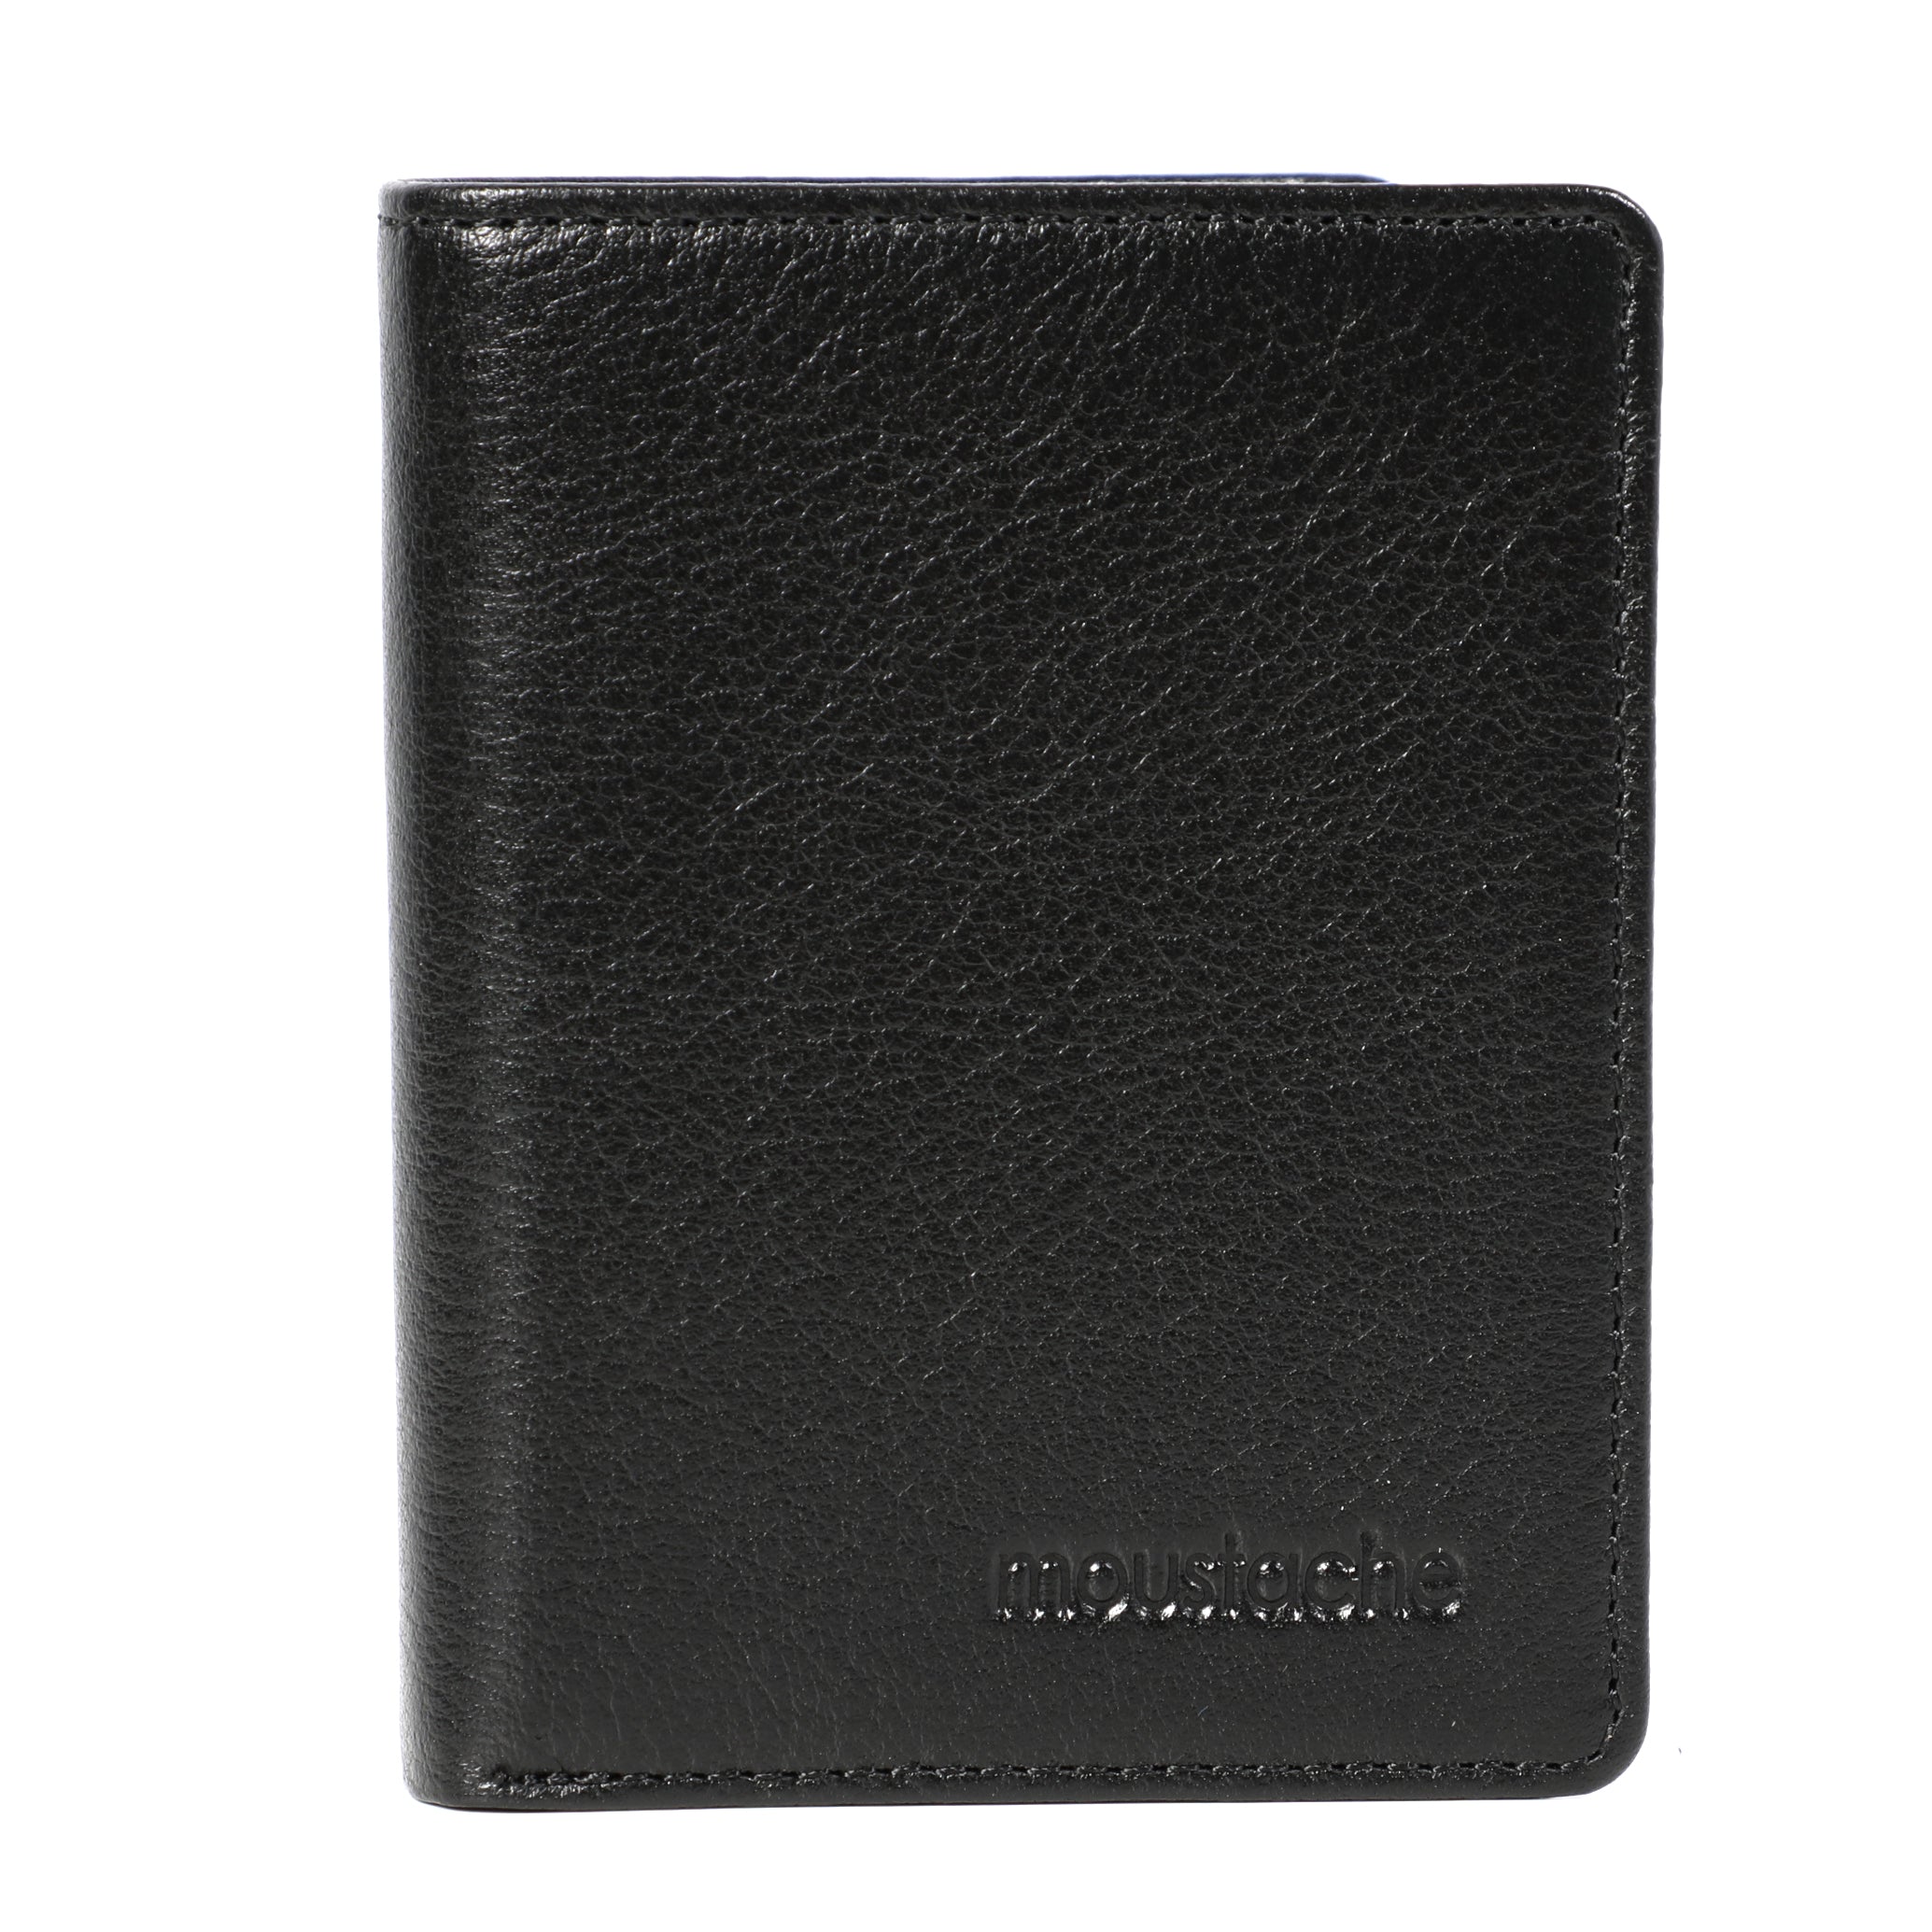 Moustache Black Leather Wallet With Several Layers